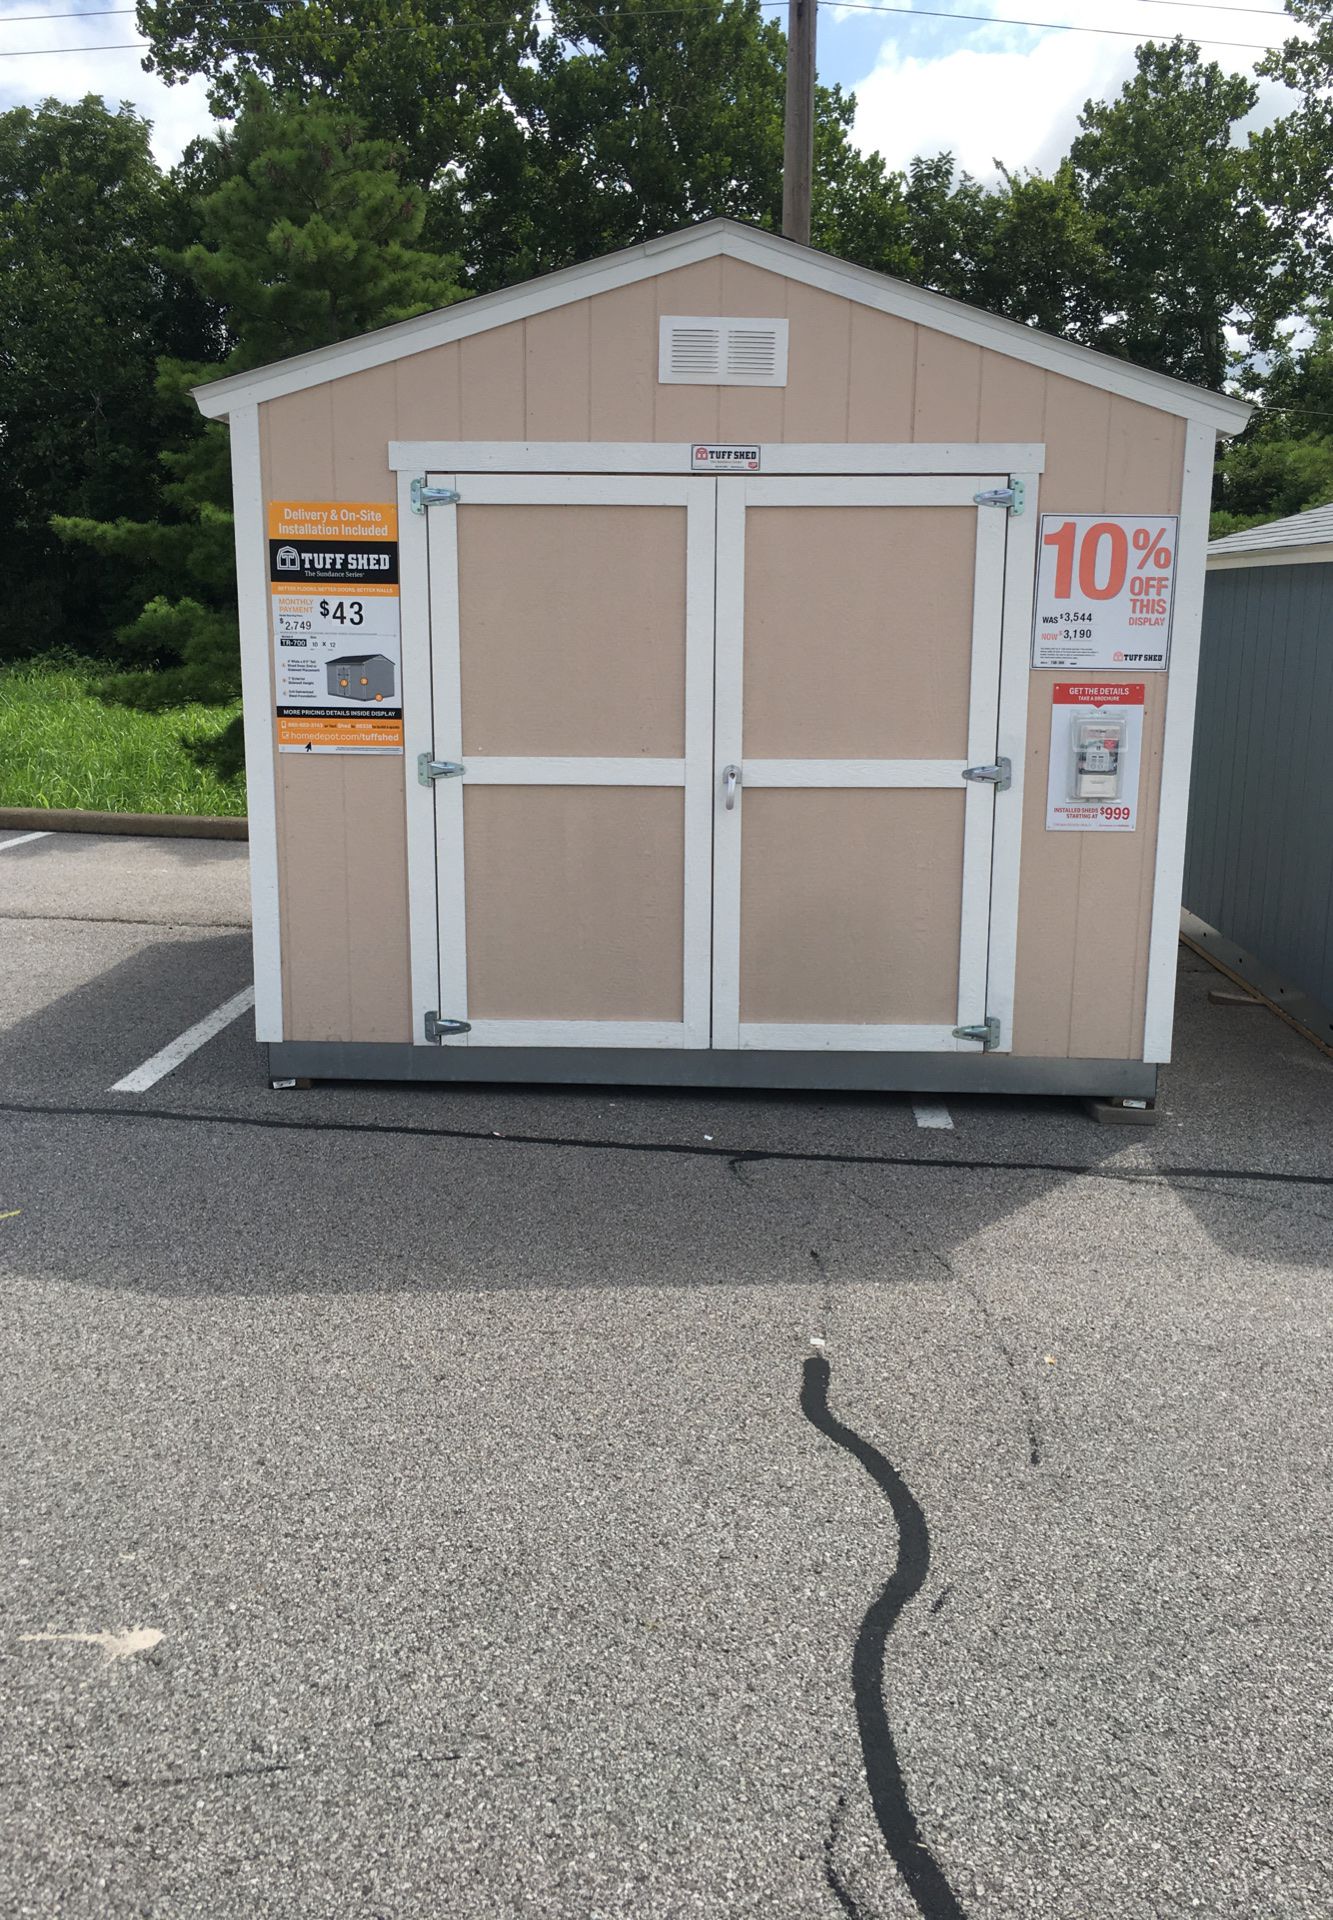 TUFF SHED 10 x 12 for $3190 delivered